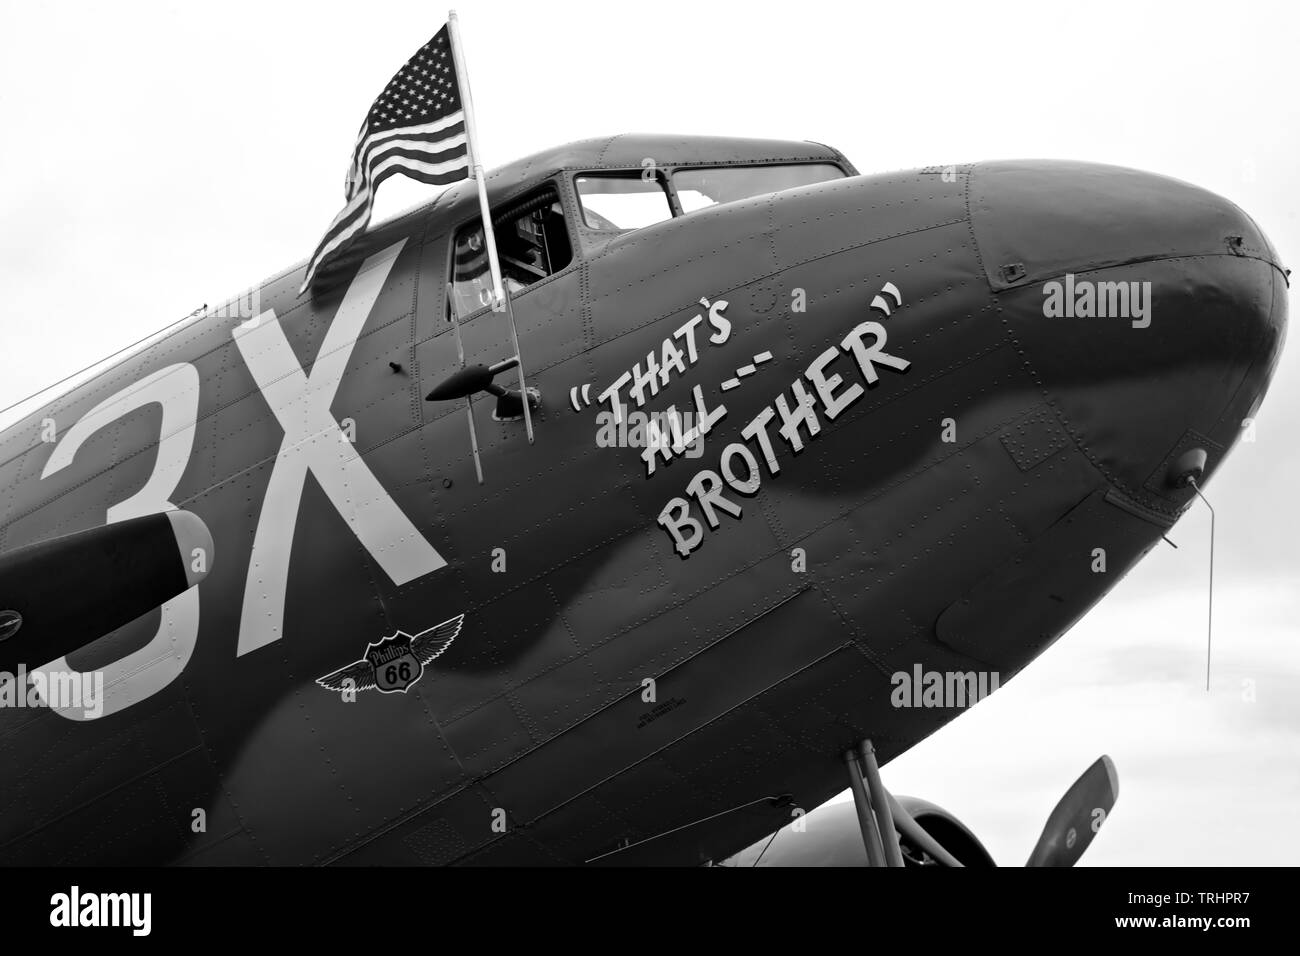 C-47 “That’s all Brother” at the 2019 Shuttleworth Air Festival Commemorate the 75th Anniversary of D-Day Stock Photo